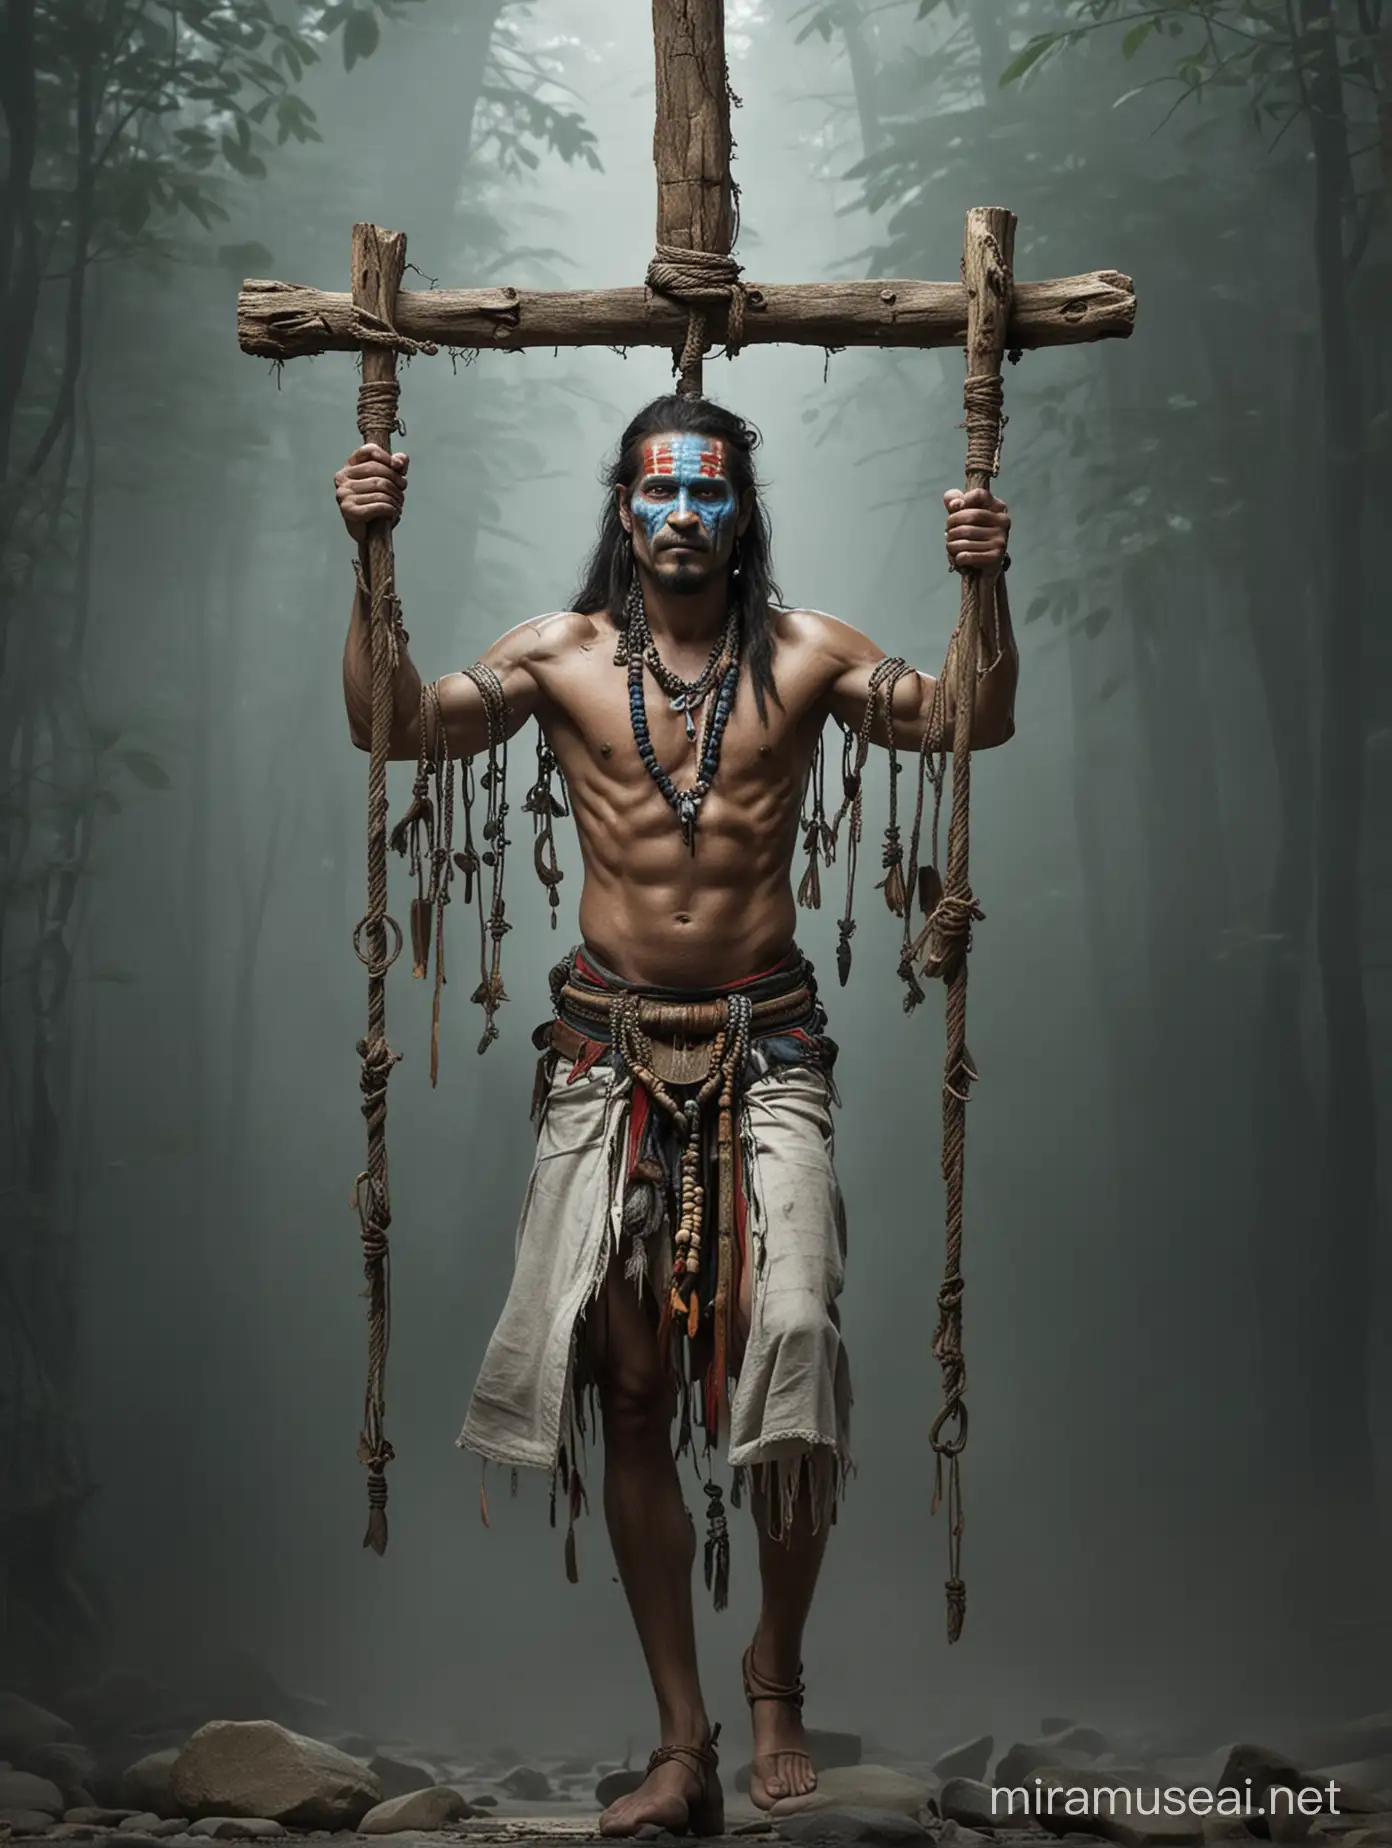 Symbolic Depiction of Shamans Struggle Breaking Free from Superstition